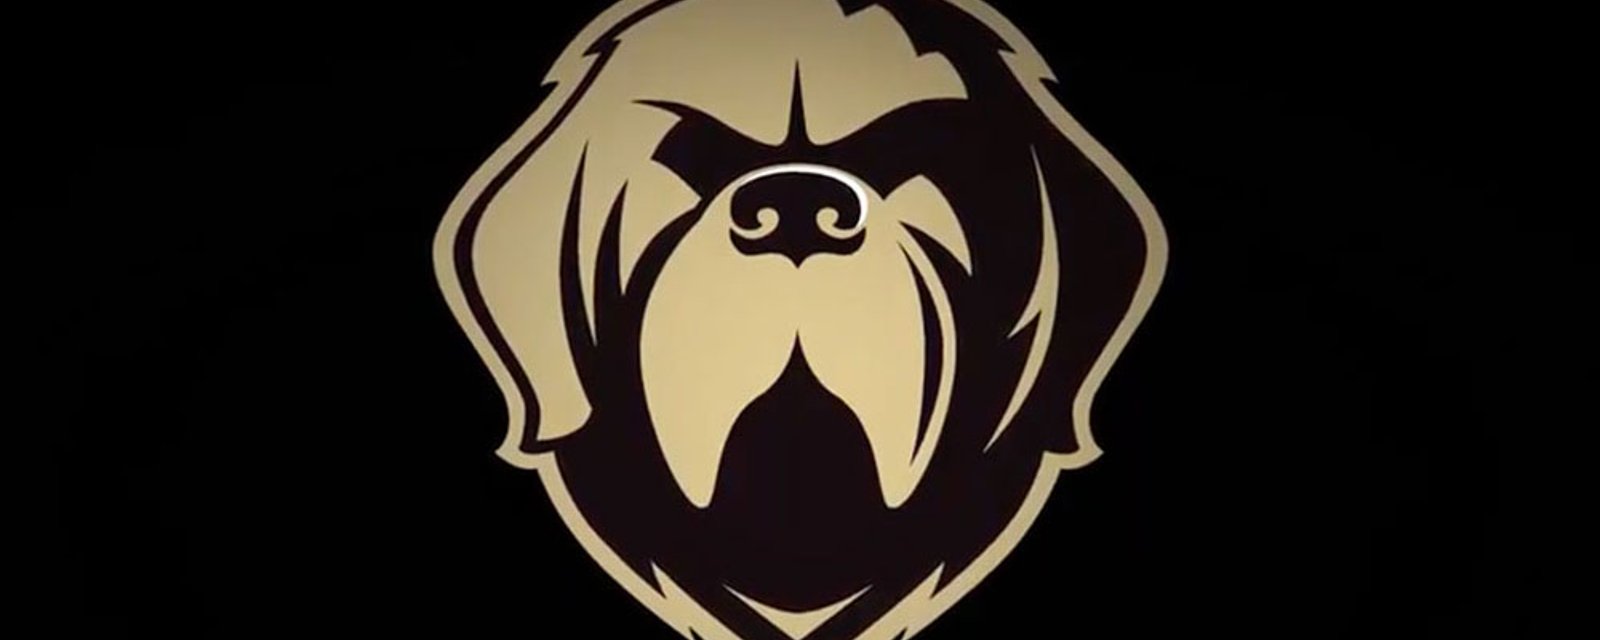 Newfoundland Growlers abruptly thrown out of the ECHL